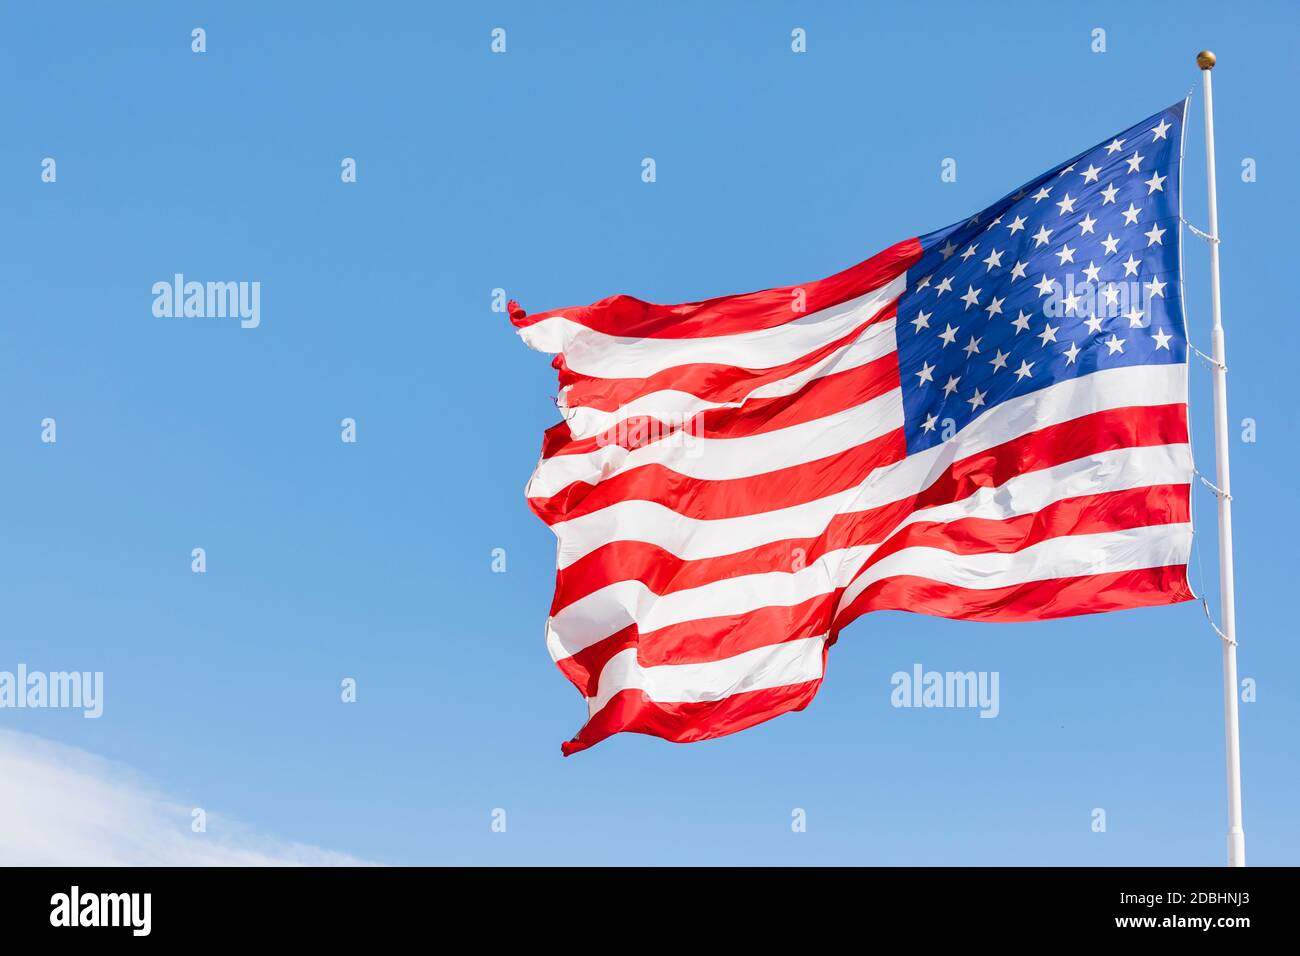 American flag waving in the wind, US flag motion on blue sky, United States of America national flag. USA stars and stripes Stock Photo